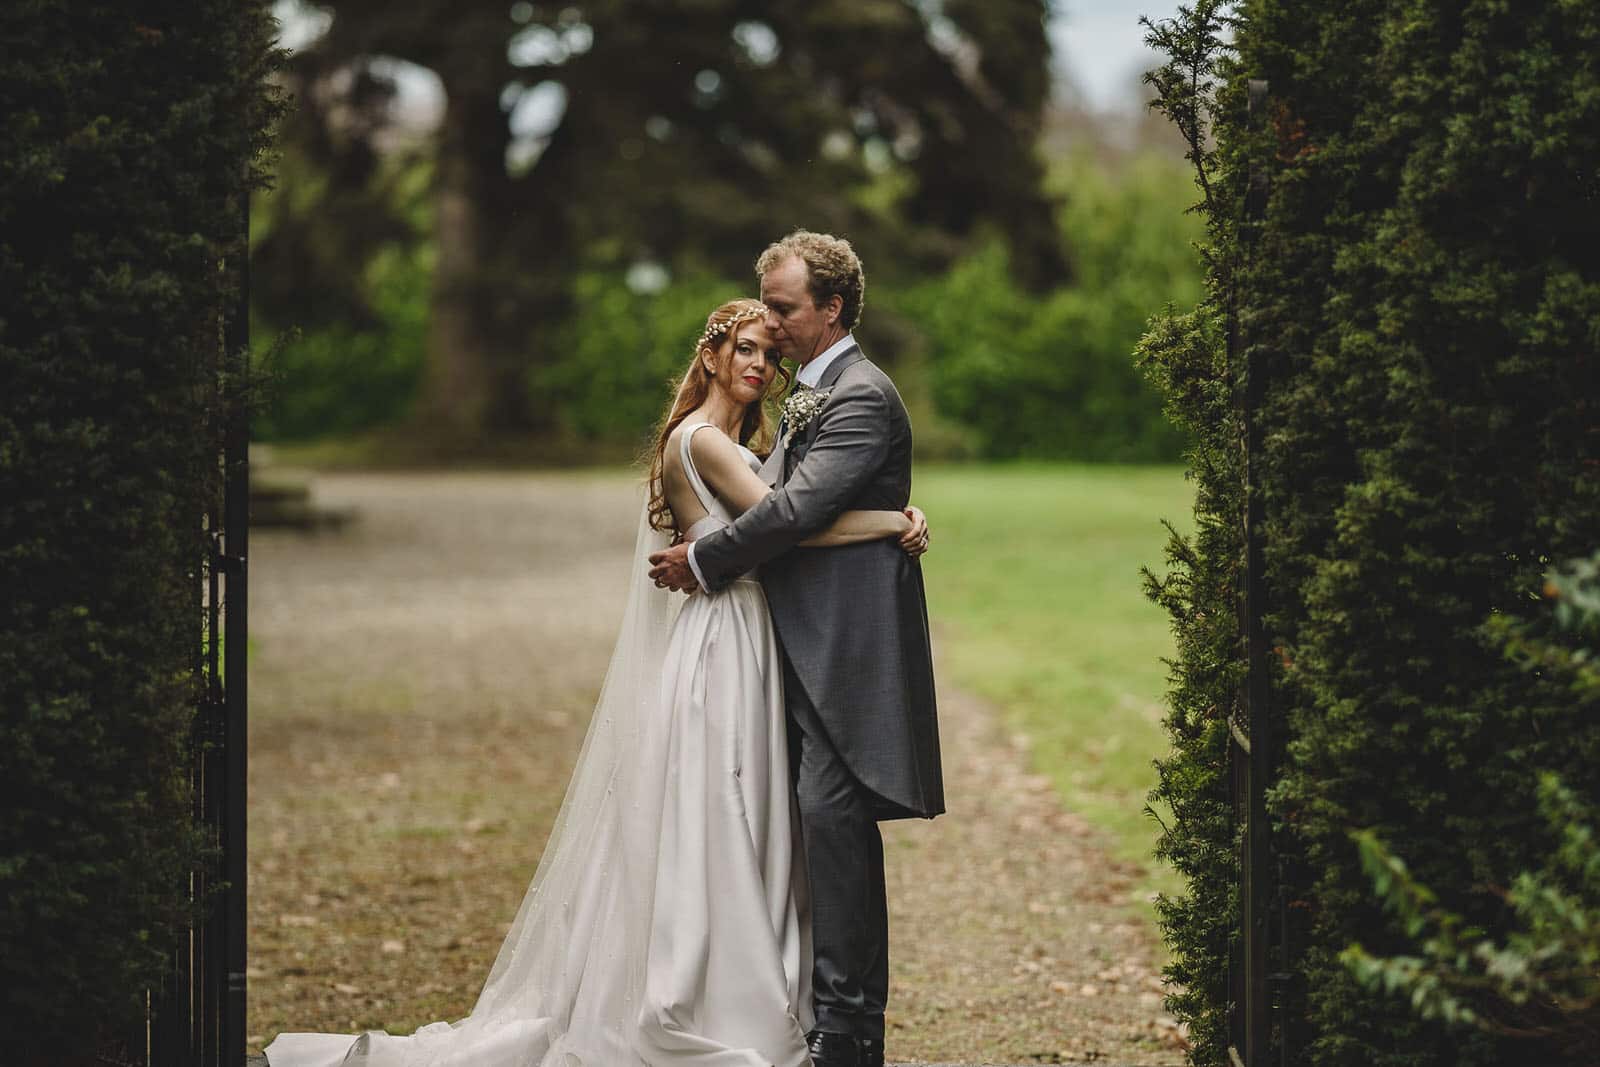 a bride and groom embracing in a garden.